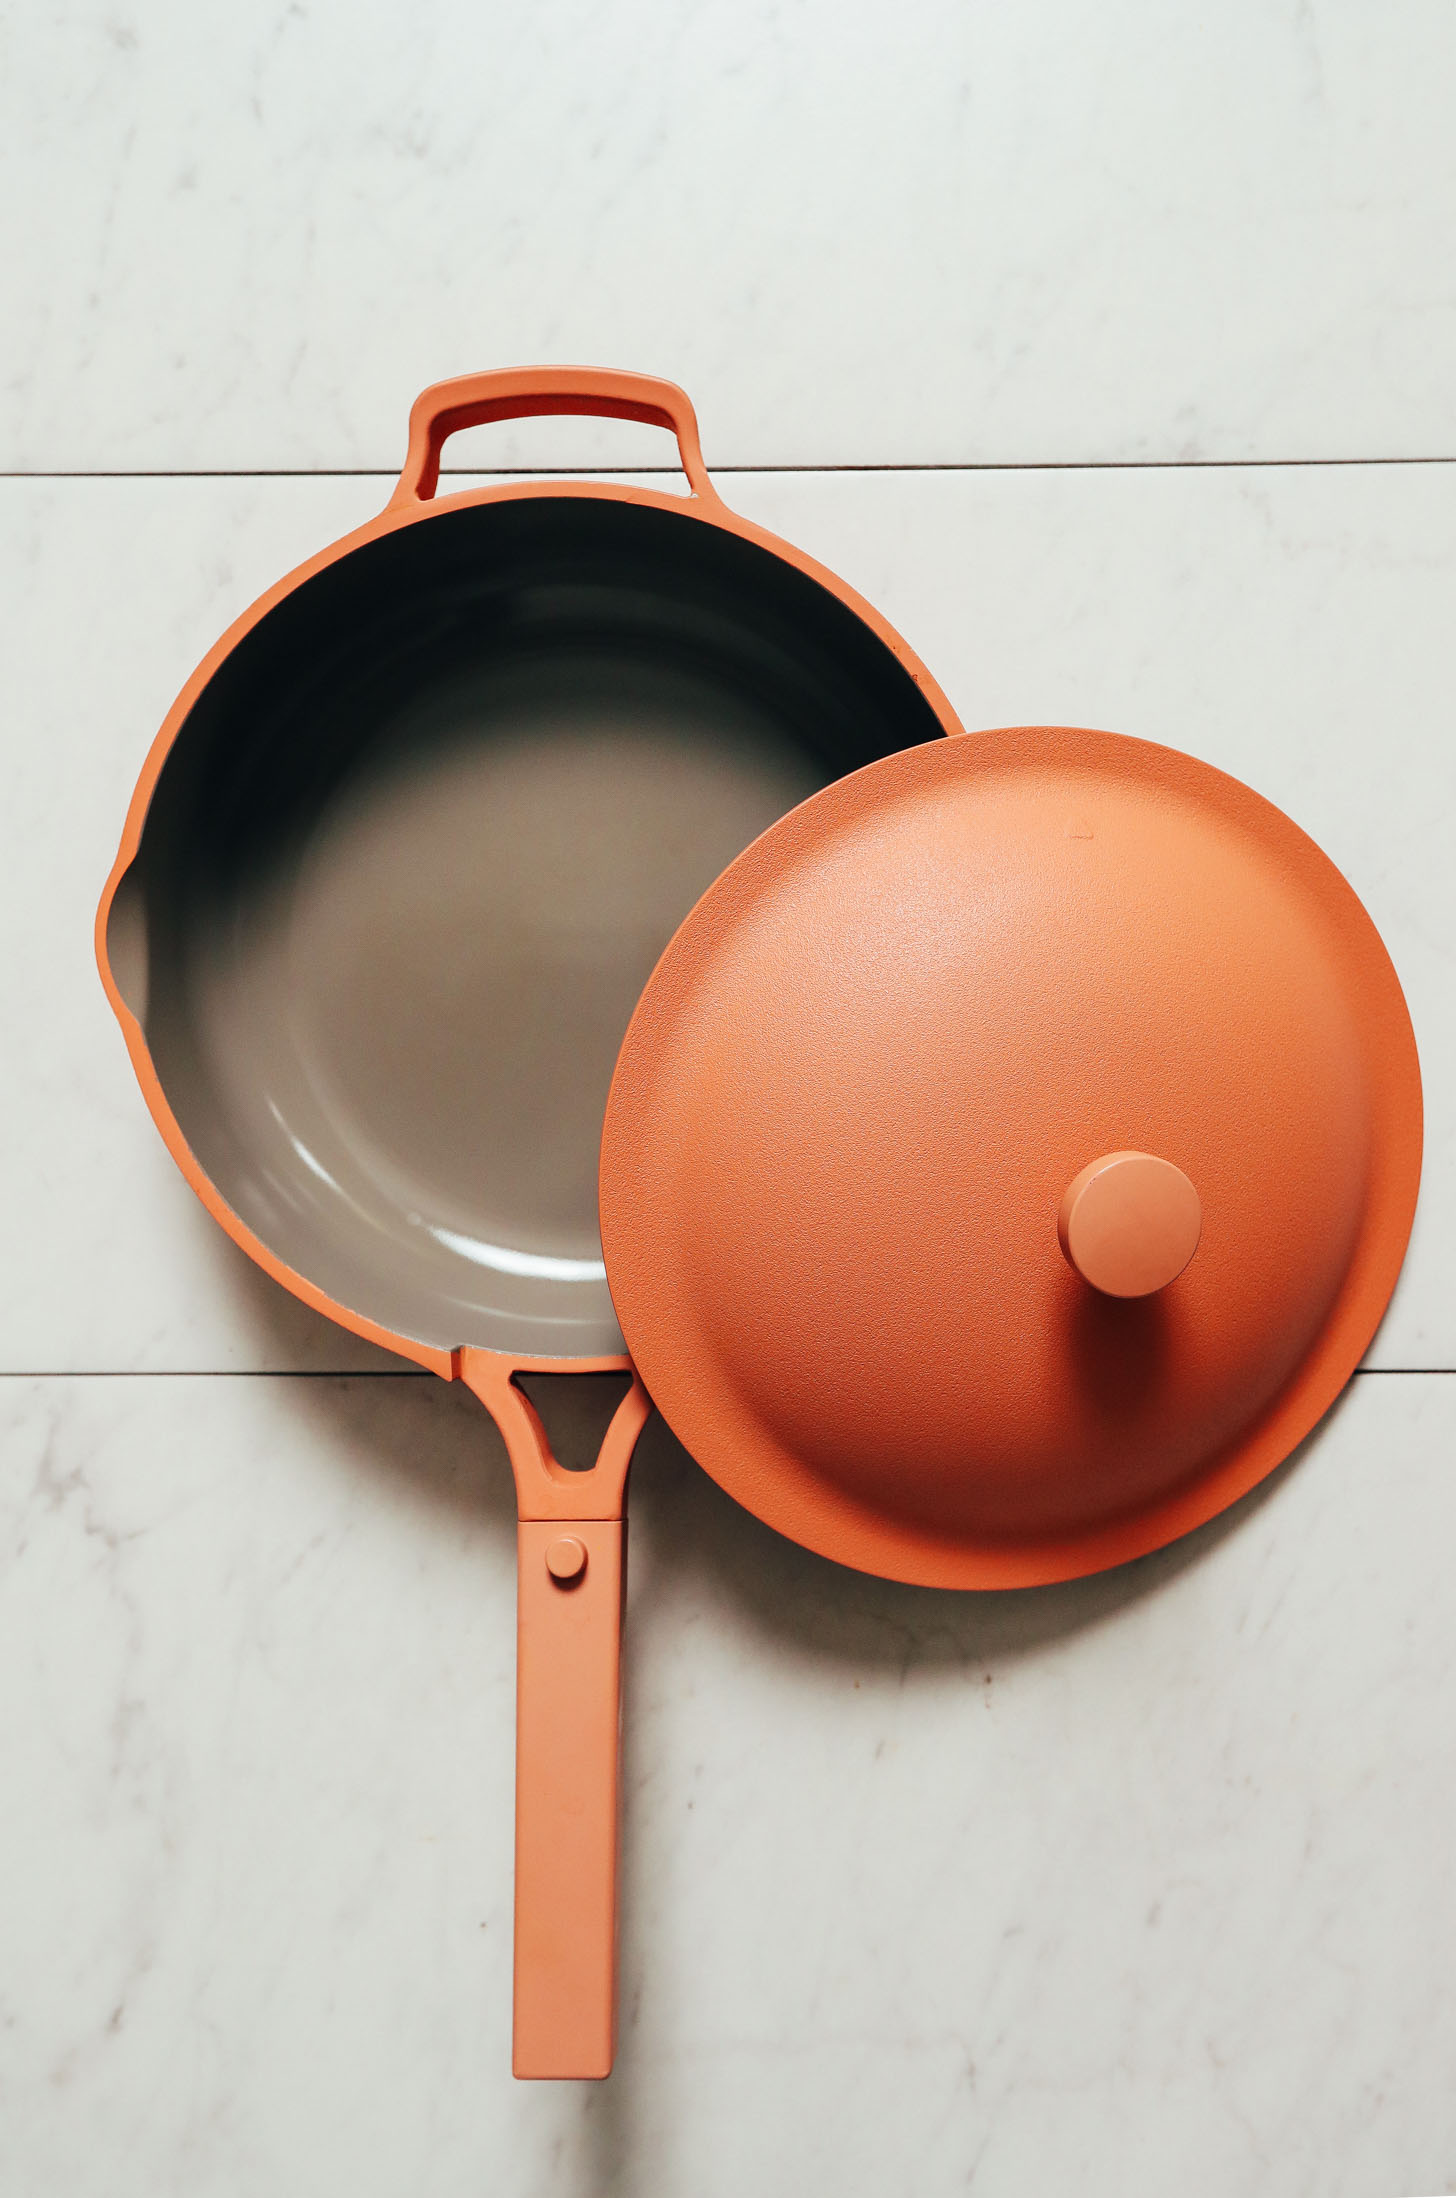 https://minimalistbaker.com/wp-content/uploads/2020/09/The-ULTIMATE-Always-Pan-Review-We-put-this-versatile-non-stick-pan-to-the-test-Is-it-worth-the-price-Read-to-find-out-alwayspan-review-minimalistbaker-3.jpg